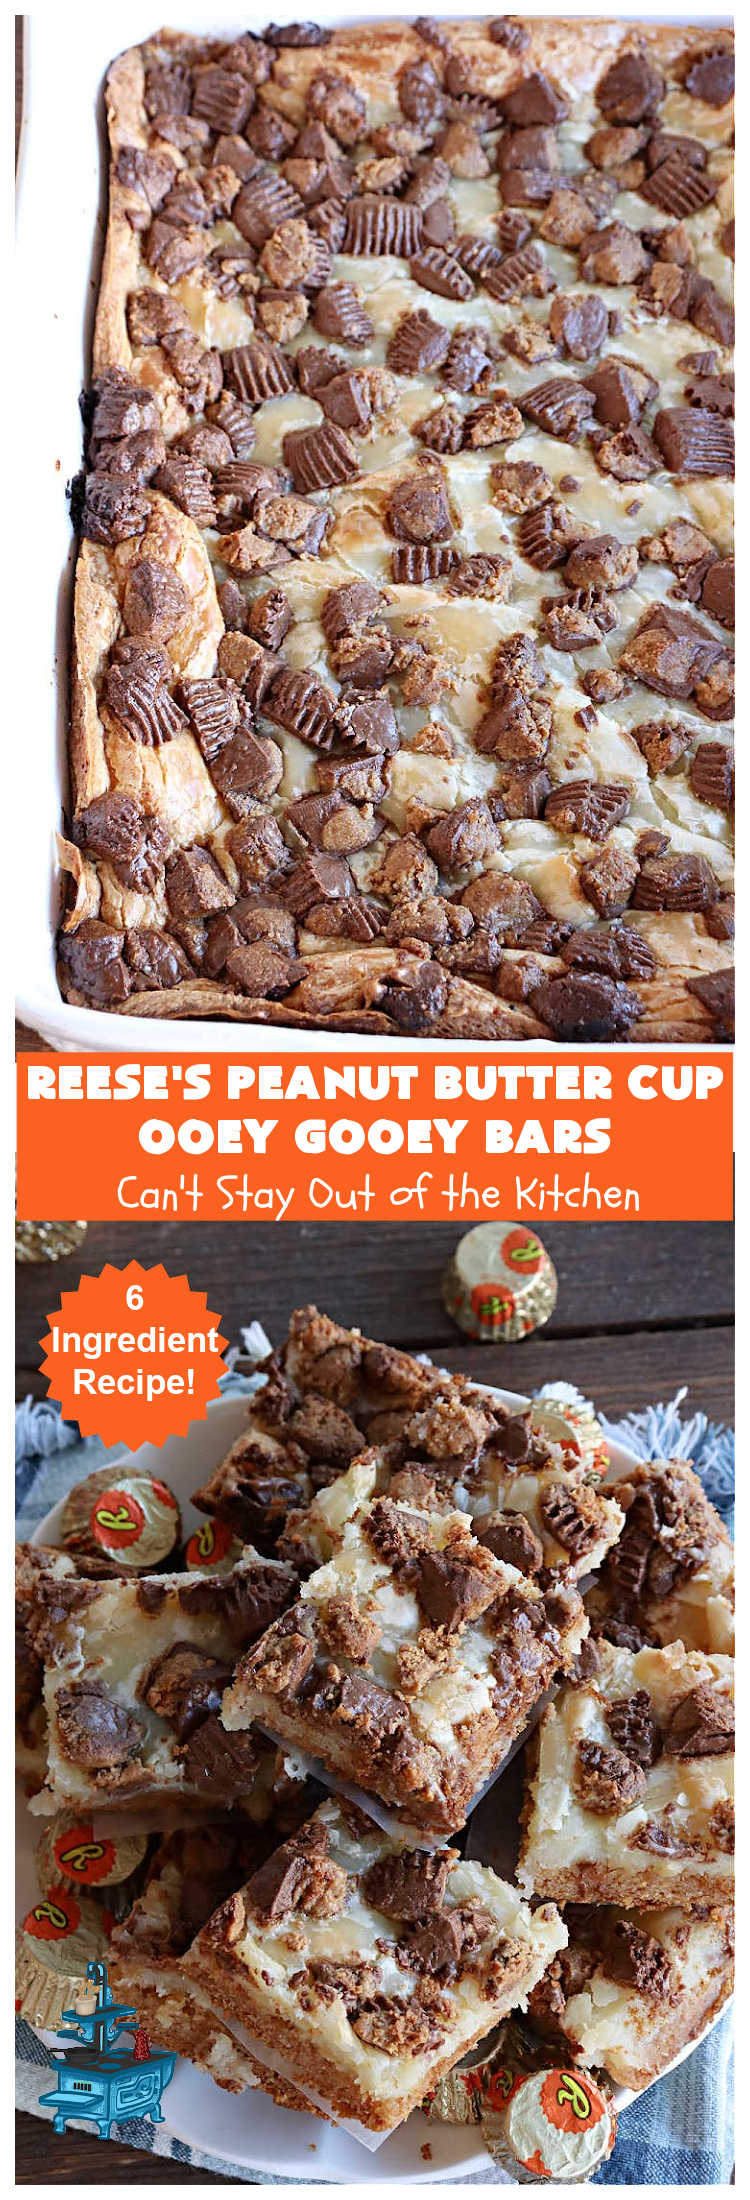 Reese's Peanut Butter Cup Ooey Gooey Bars | Can't Stay Out of the Kitchen | This fabulous #OoeyGooeyBar #recipe uses only 6 ingredients! It has a luscious #cheesecake filling & it's topped with #ReesesPeanutButterCups. Every bite will have you swooning! Great for #holiday #baking, #tailgating parties, a #ChristmasCookieExchange or any time you just need #chocolate! #PeanutButter #dessert #brownie #cookie #CreamCheese #ReesesPeanutButterCupOoeyGooeyBars